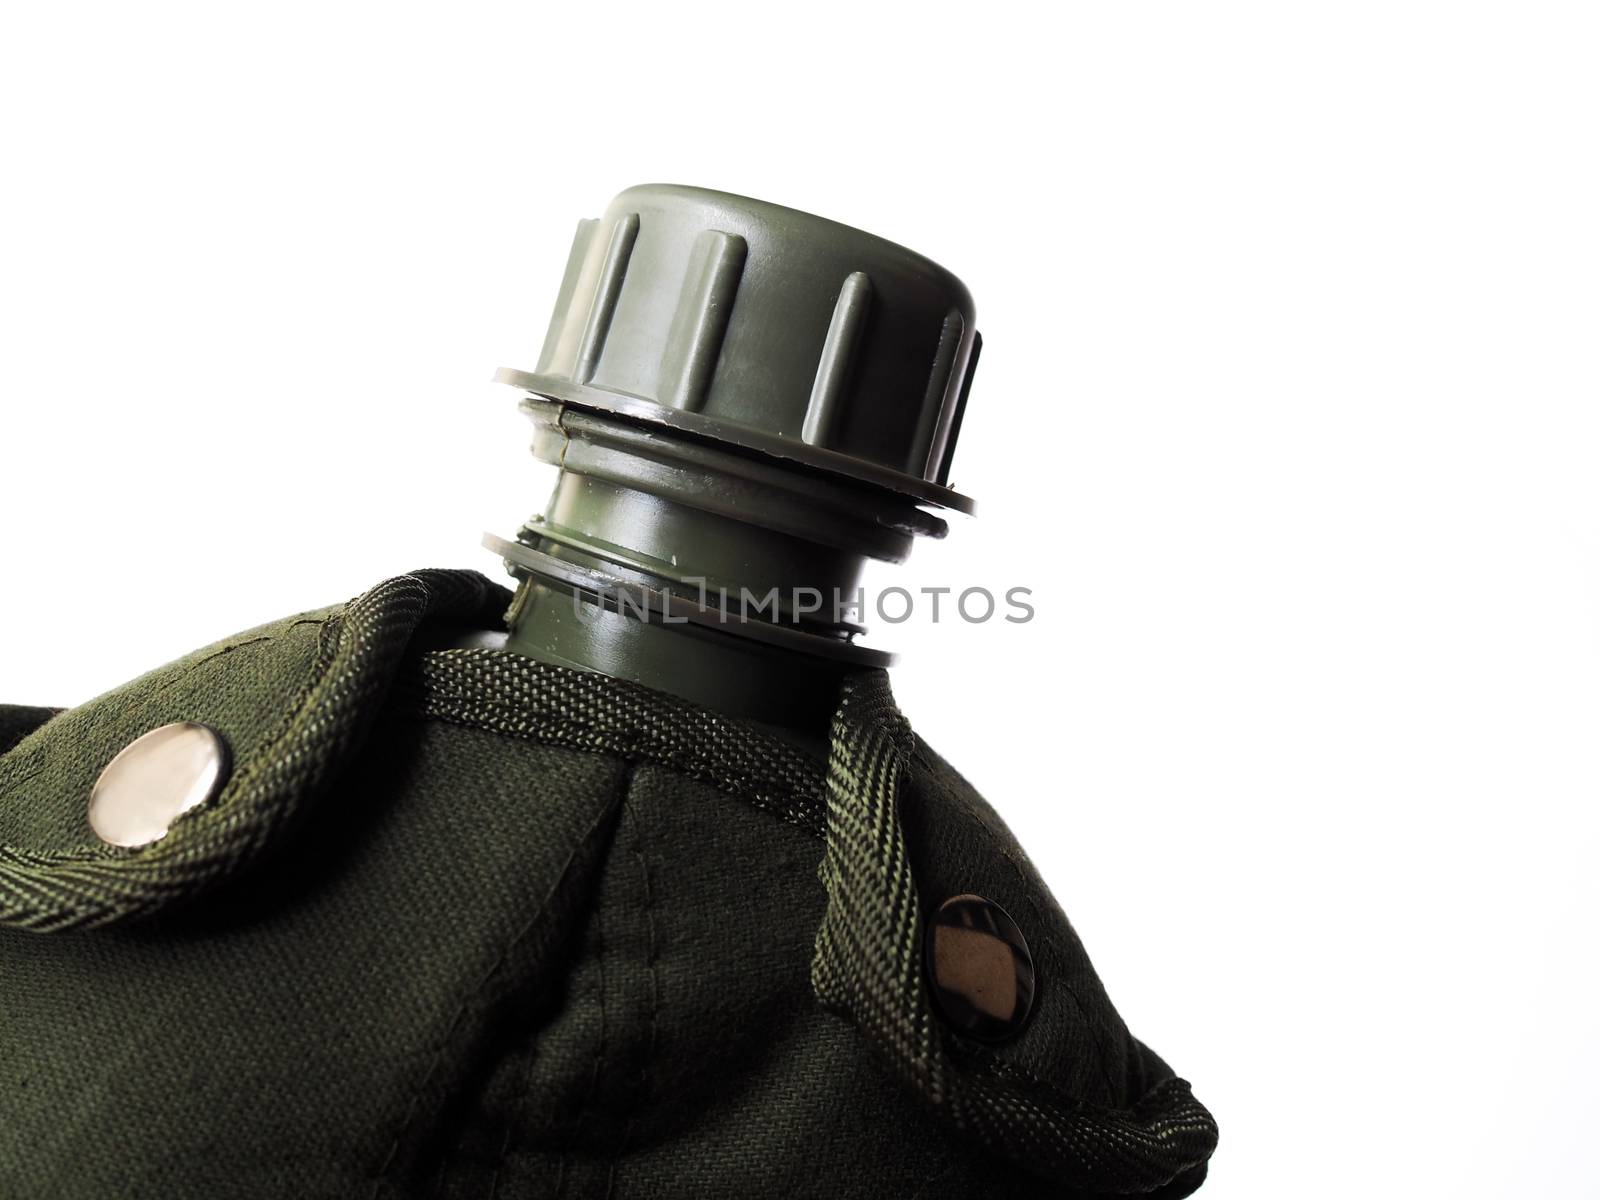 Green military water bottle for hiking, camping. Isolated on white background.